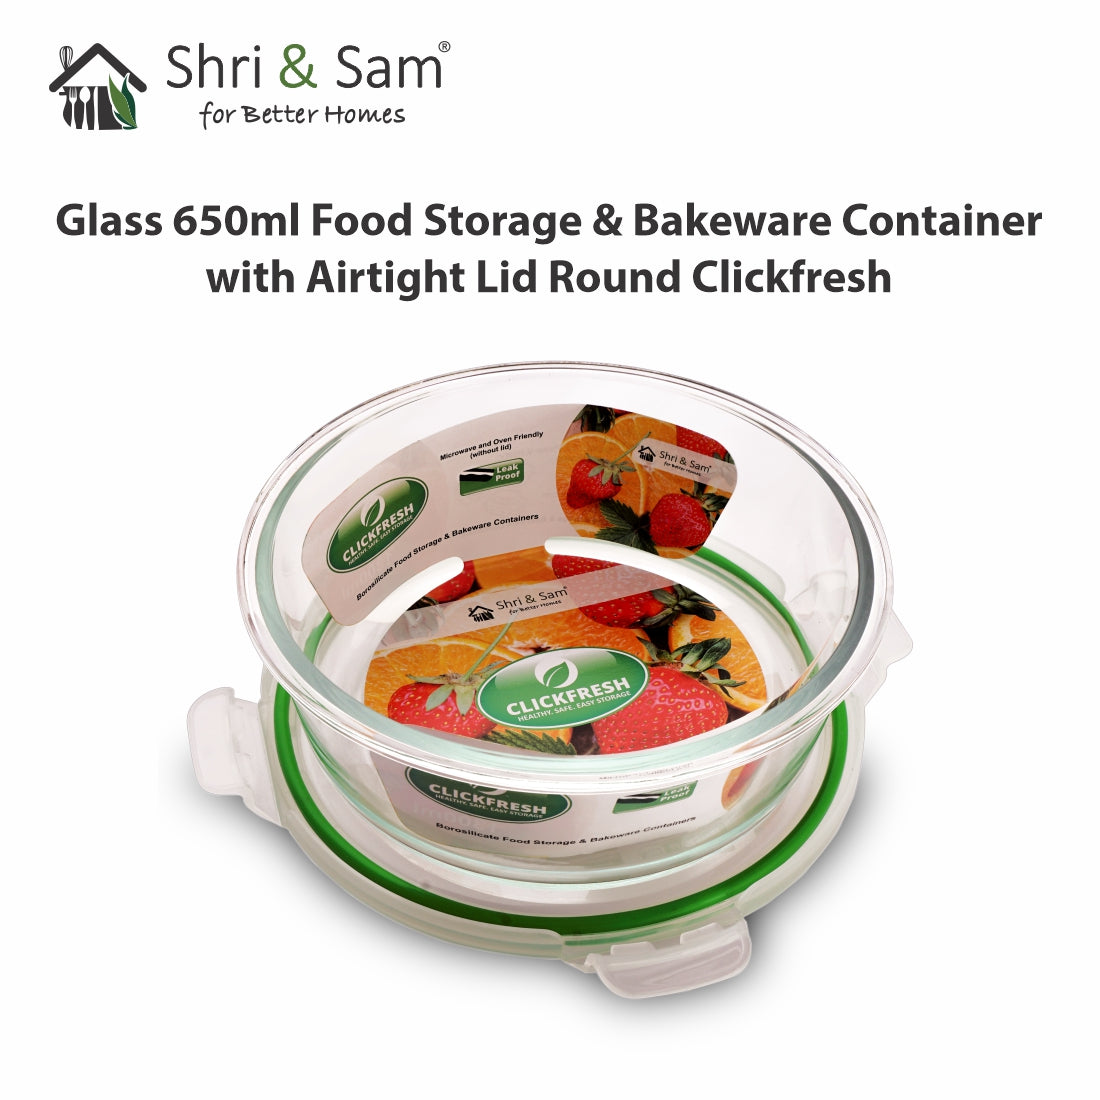 Glass 650ml Food Storage & Bakeware Container with Airtight Lid Round Clickfresh